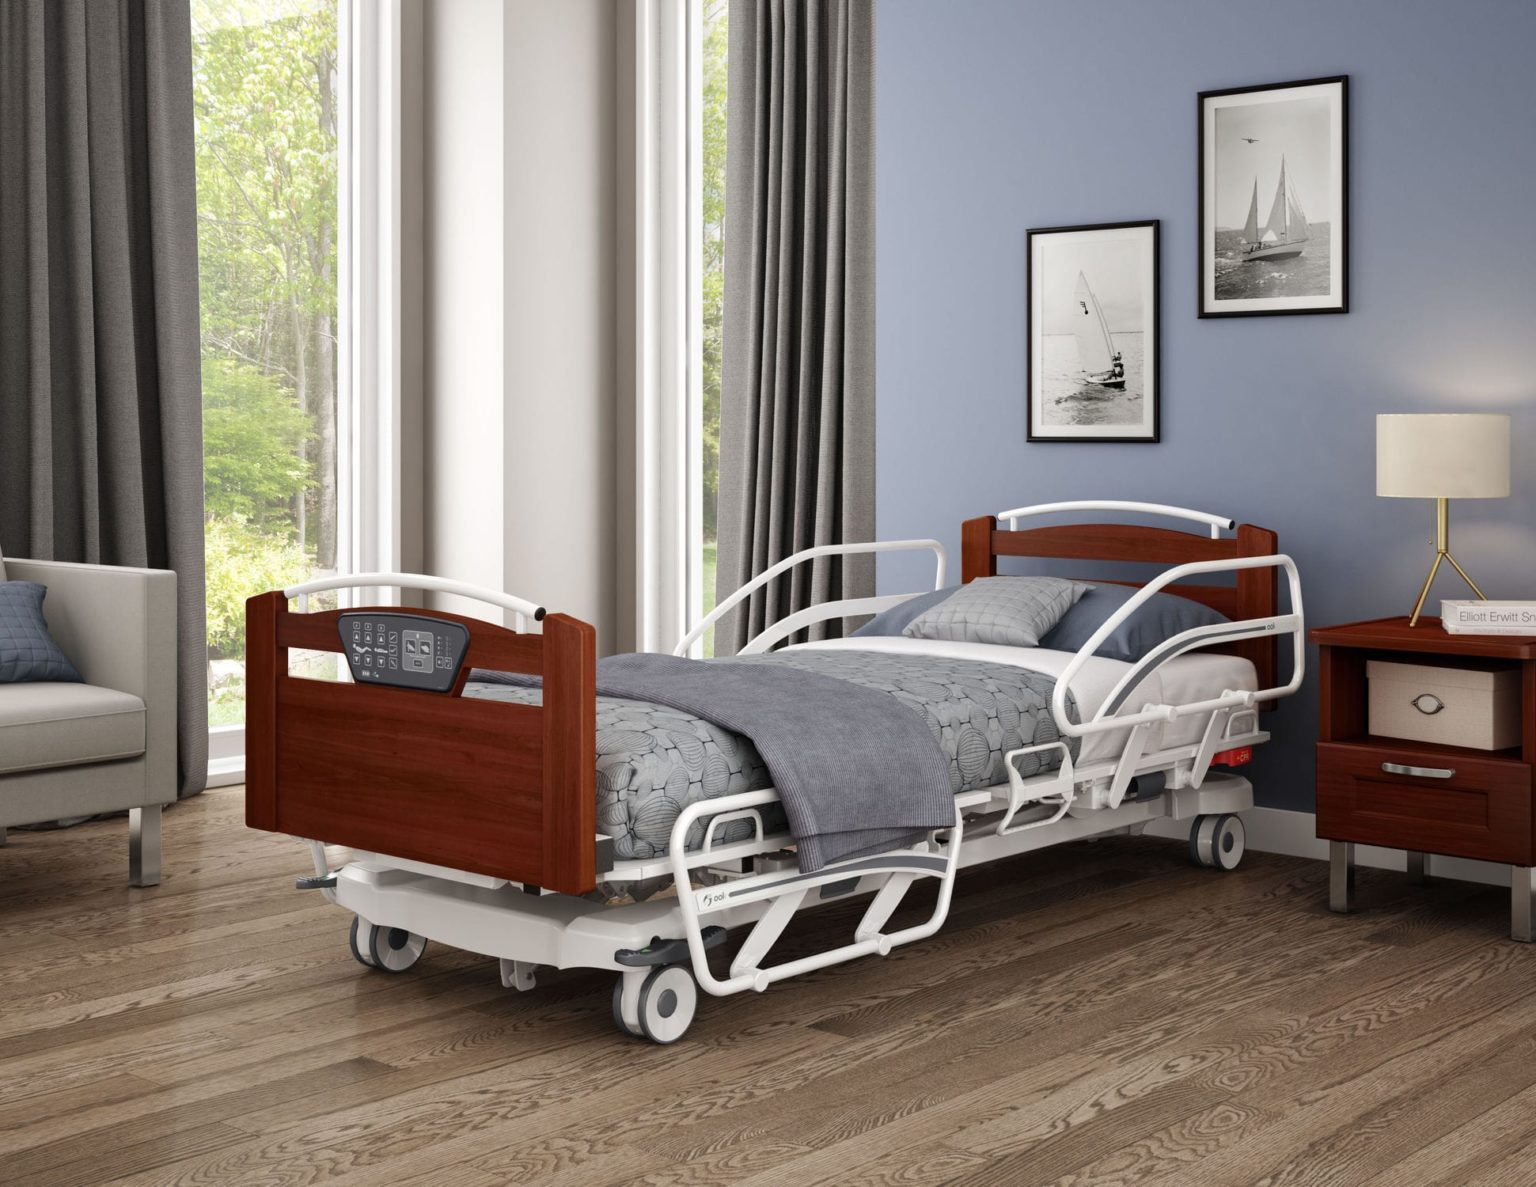 Living Room Hospital Bed At Home